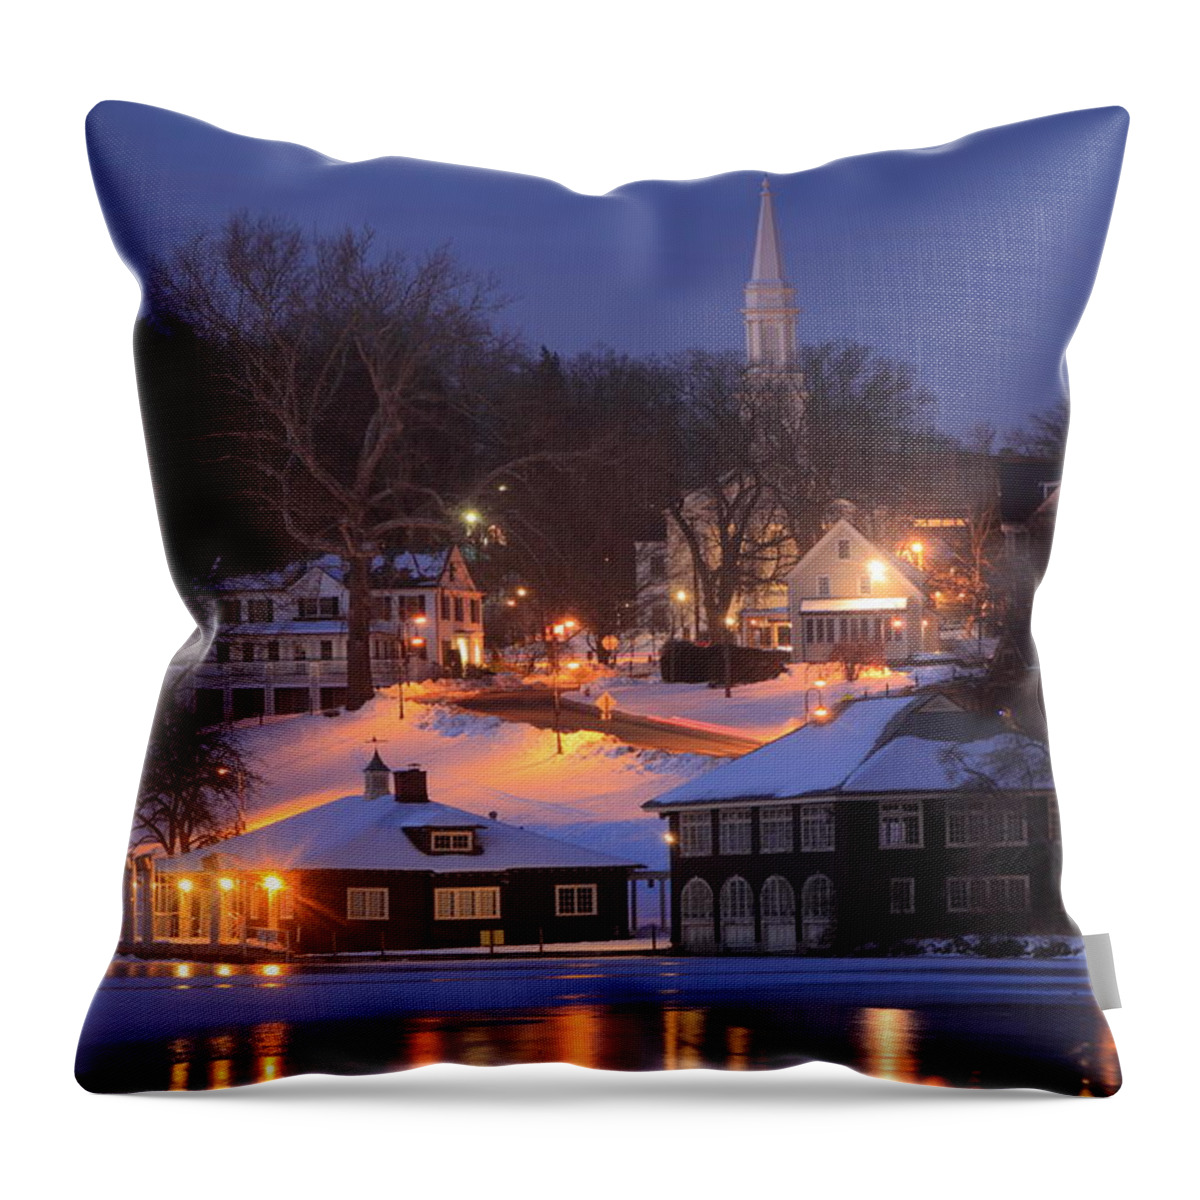 Smith College Throw Pillow featuring the photograph Paradise Pond Smith College Winter Evening by John Burk